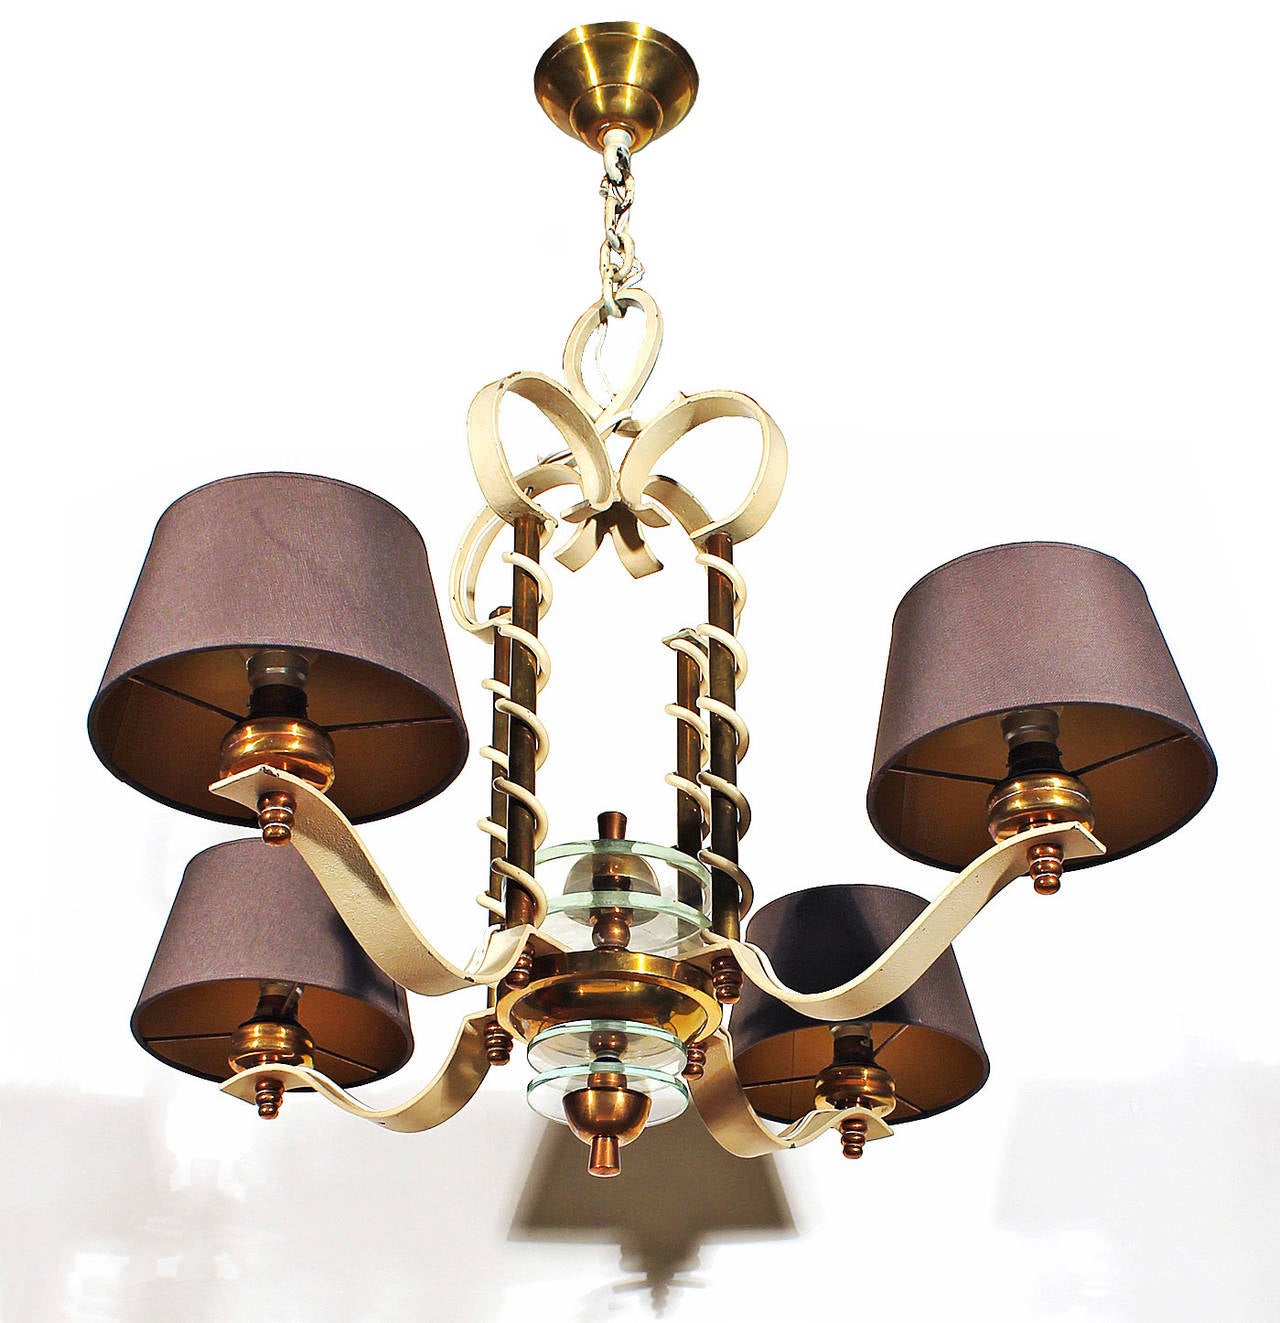 Mid-Century Modern Wrought Iron Chandelier from the 1940s